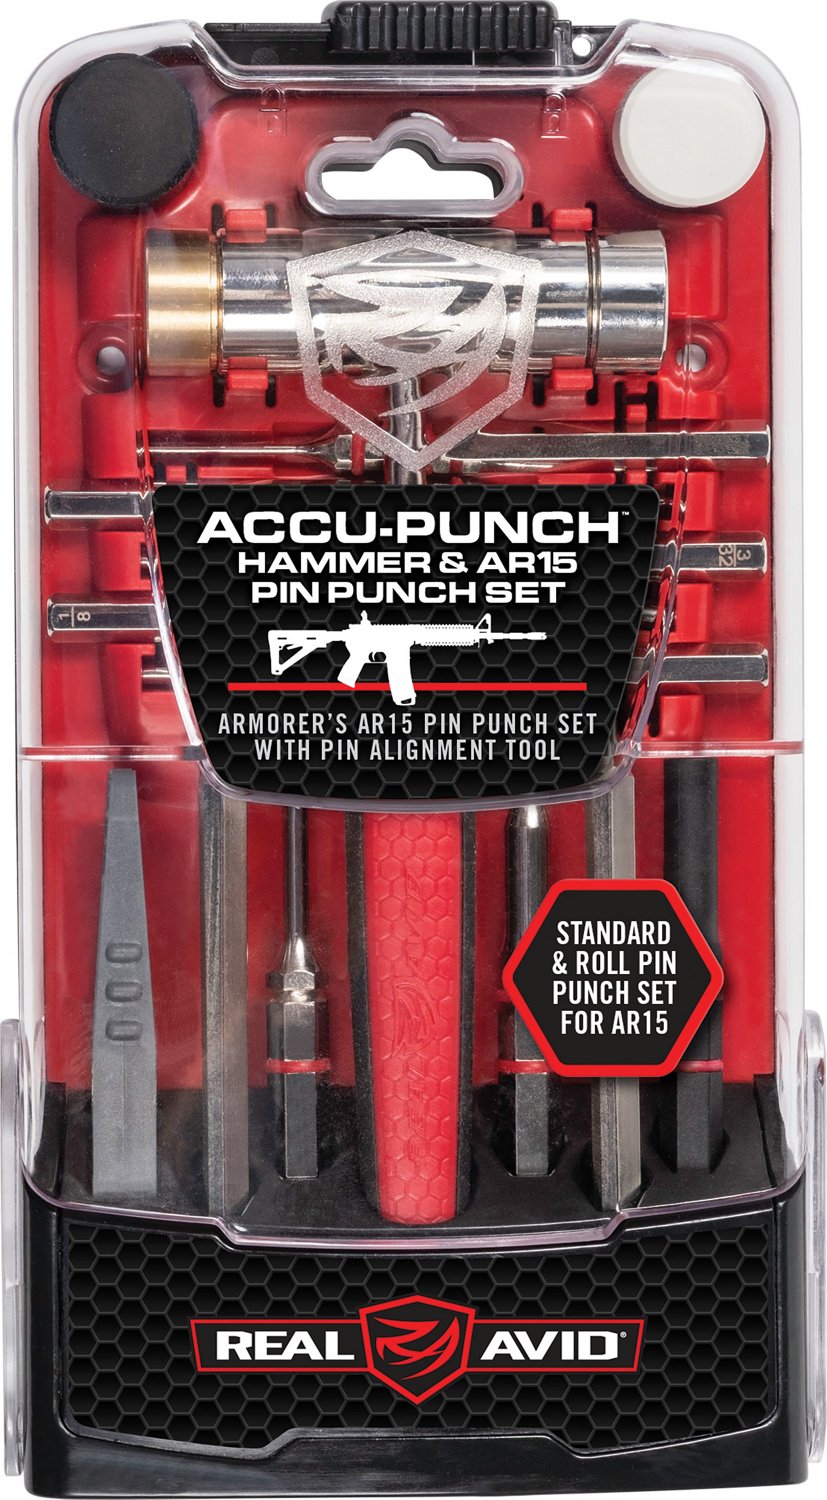 Real Avid Accu-Punch Hammer & Punches